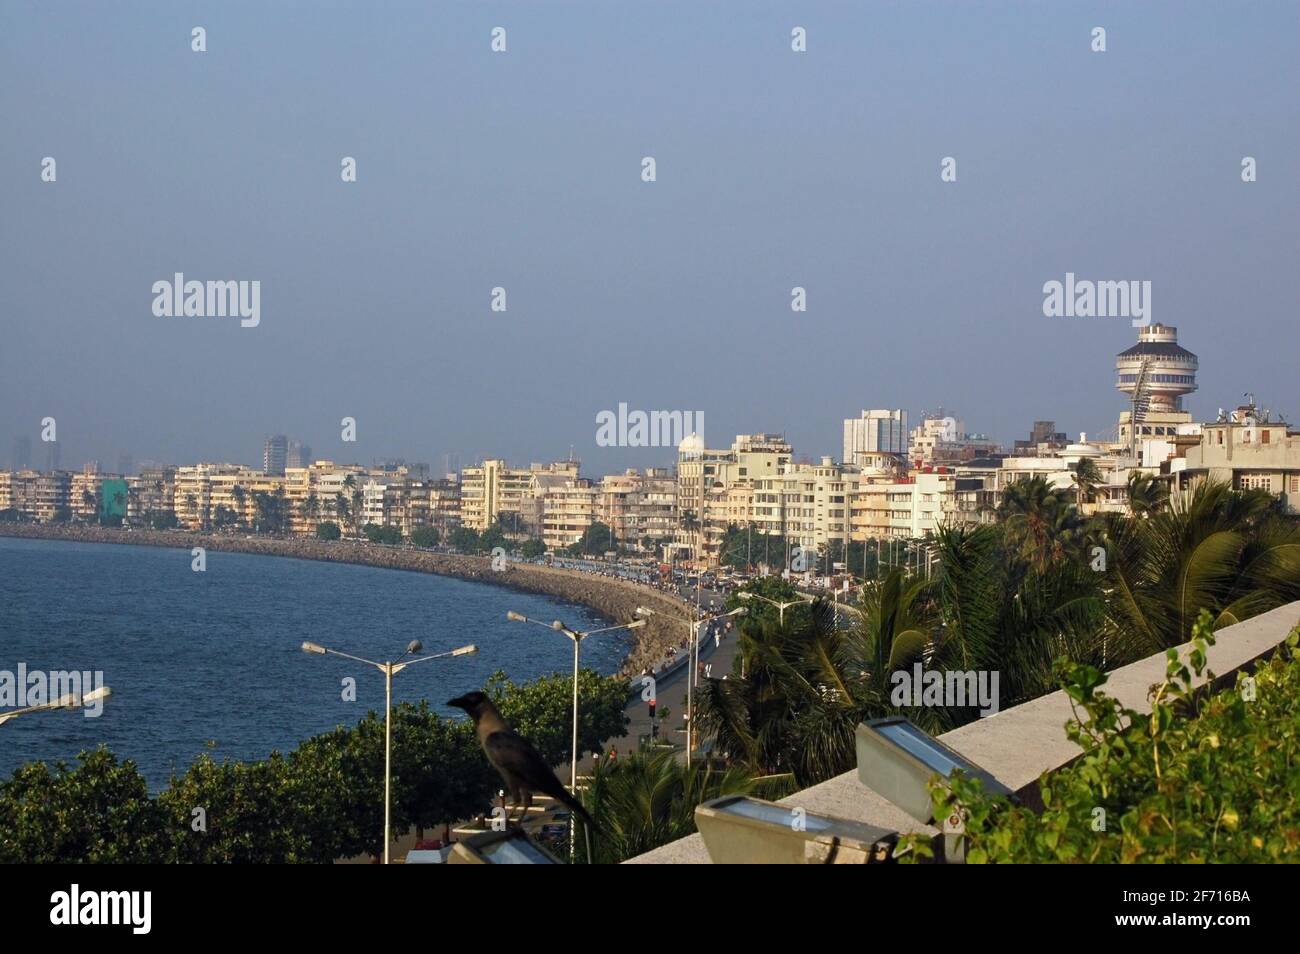 A view looking north along Marine Drive and Back Bay in the city of Mumbai (formerly Bombay) with the Indian Ocean lapping against the beach. Stock Photo